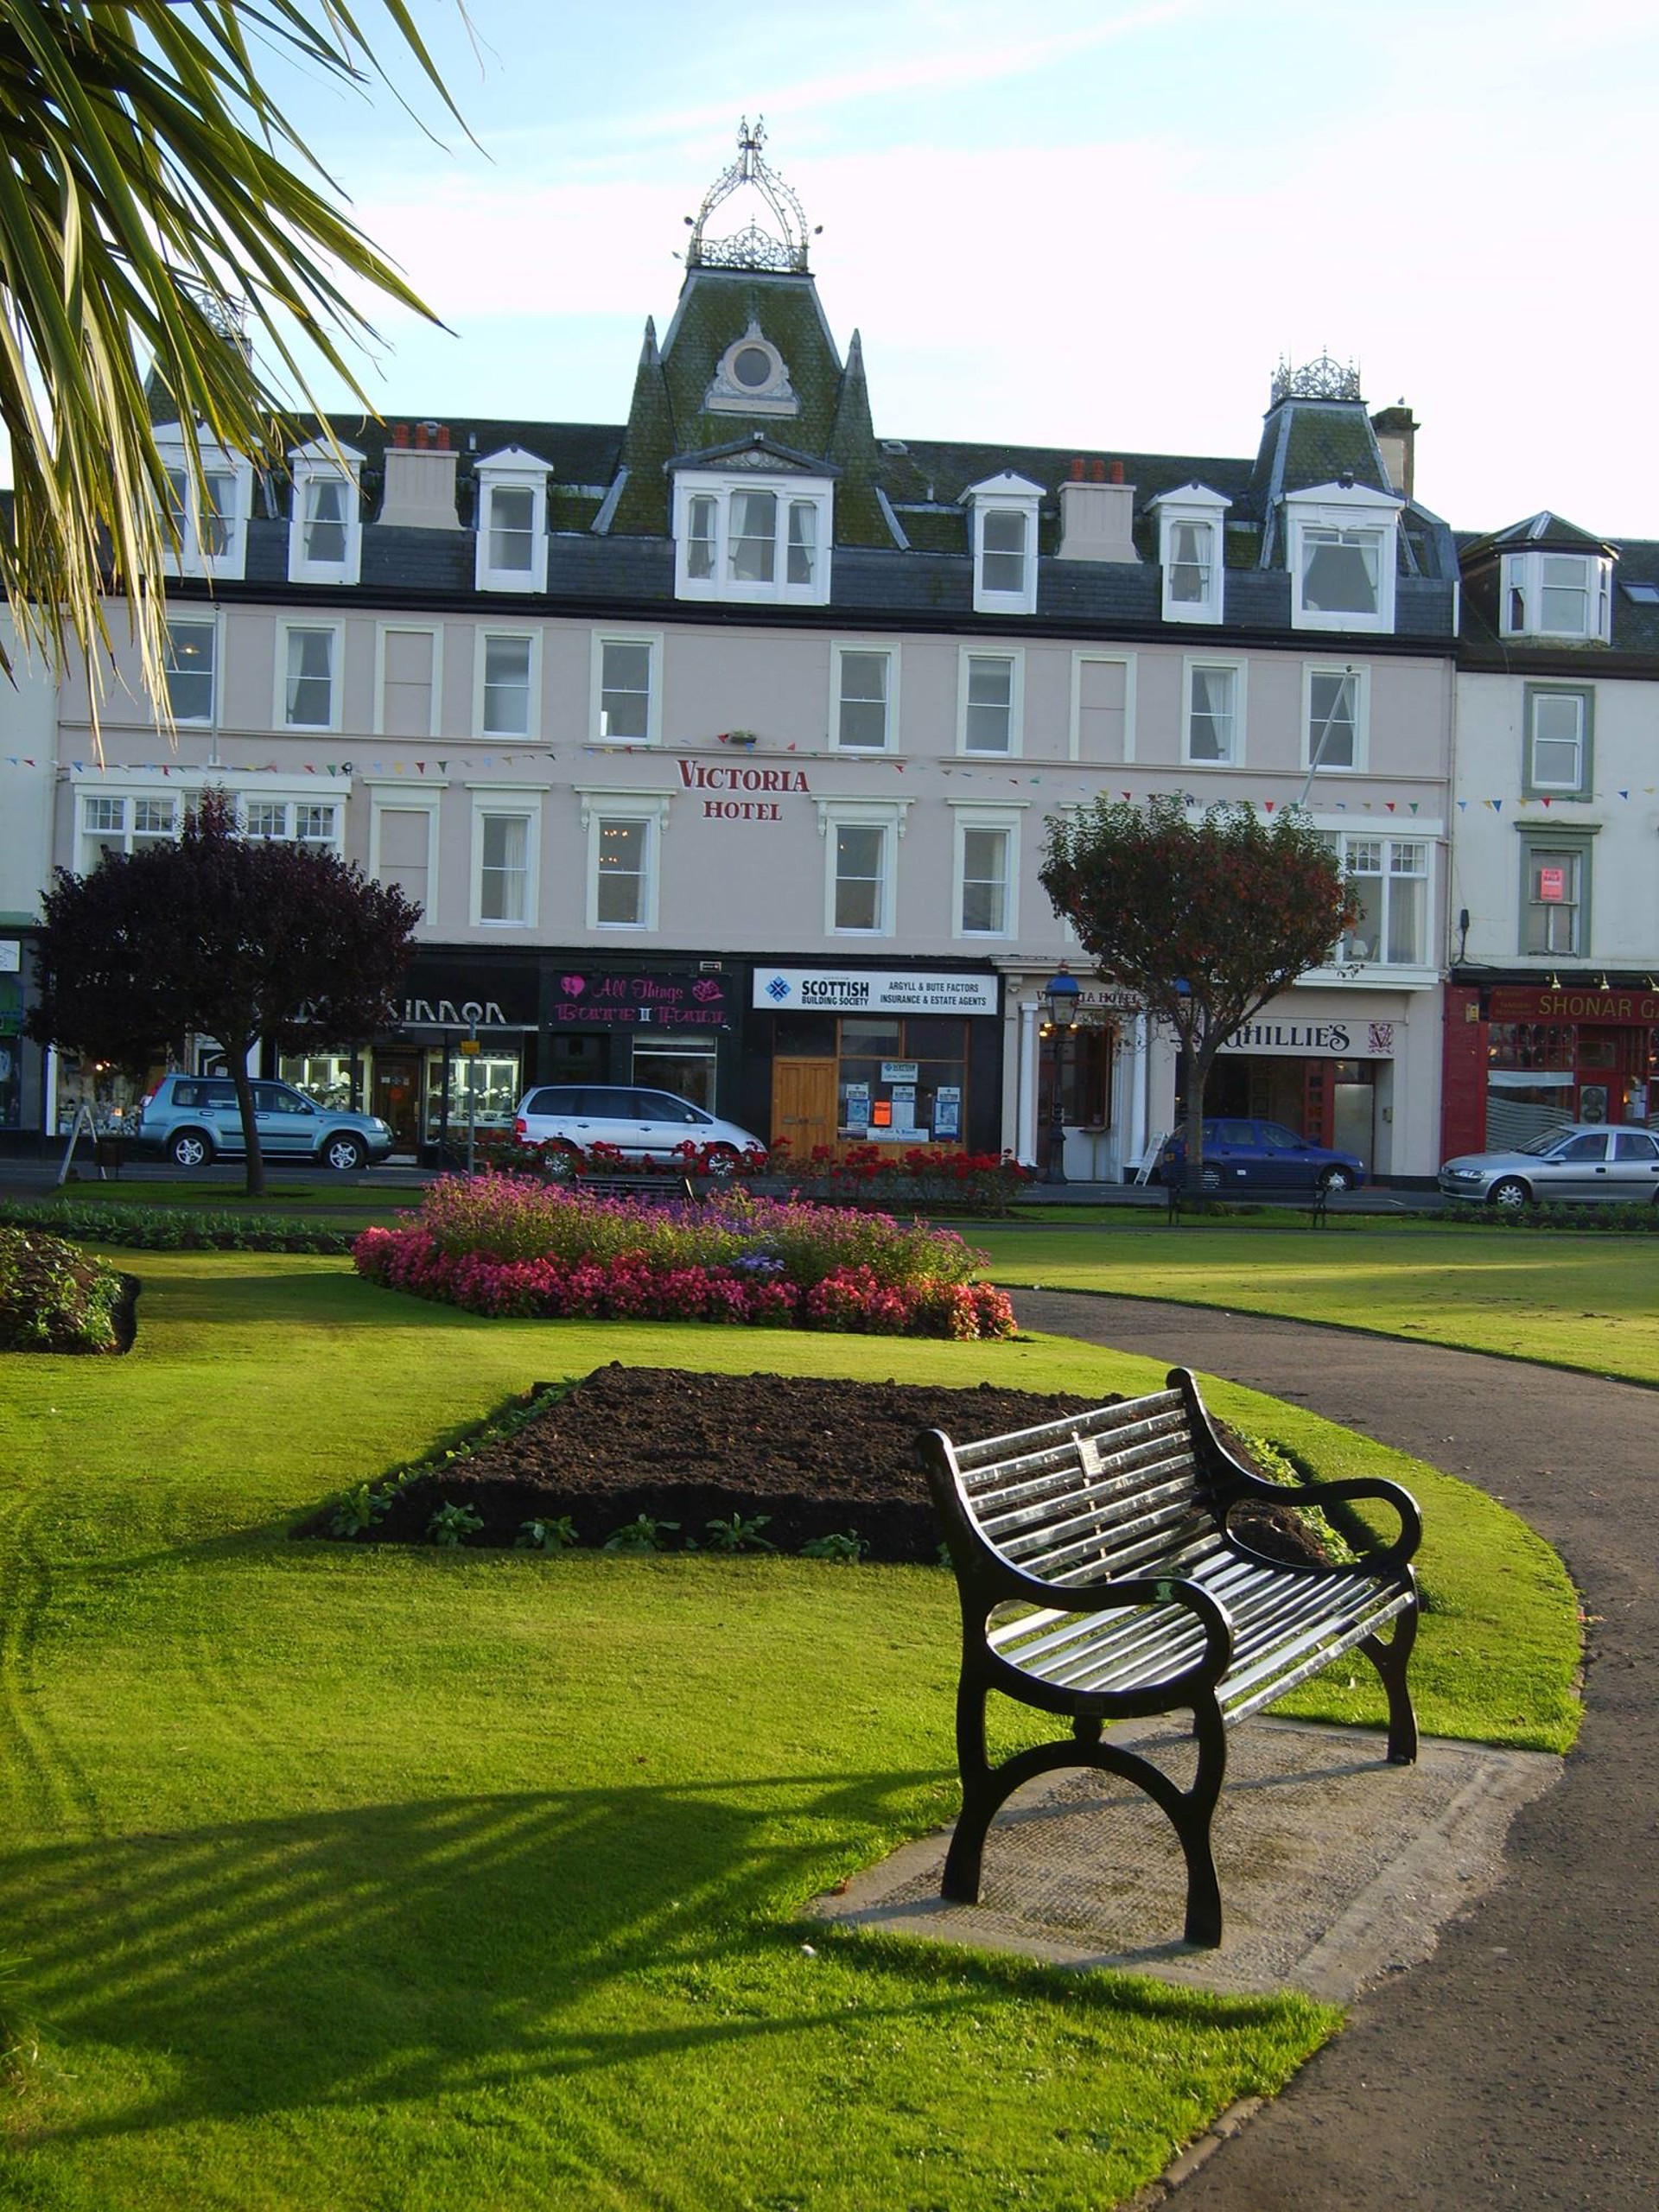 Background image - The Victoria Hotel